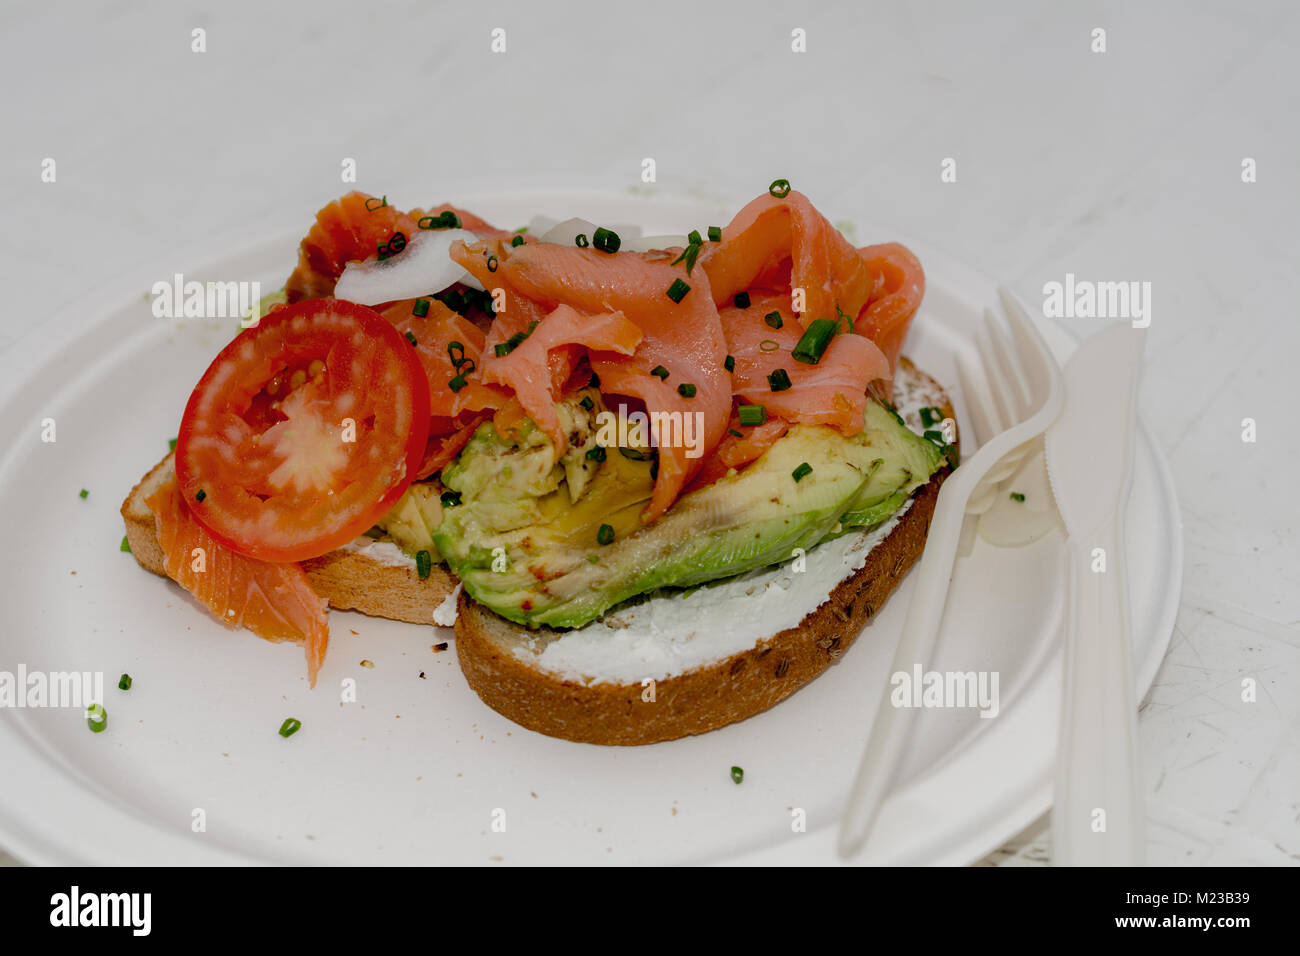 Gourmet Mexican avocado toast garnished with cream cheese, lemon zest, smoked salmon, and tomato, on white plate and table served with plastic fork an Stock Photo